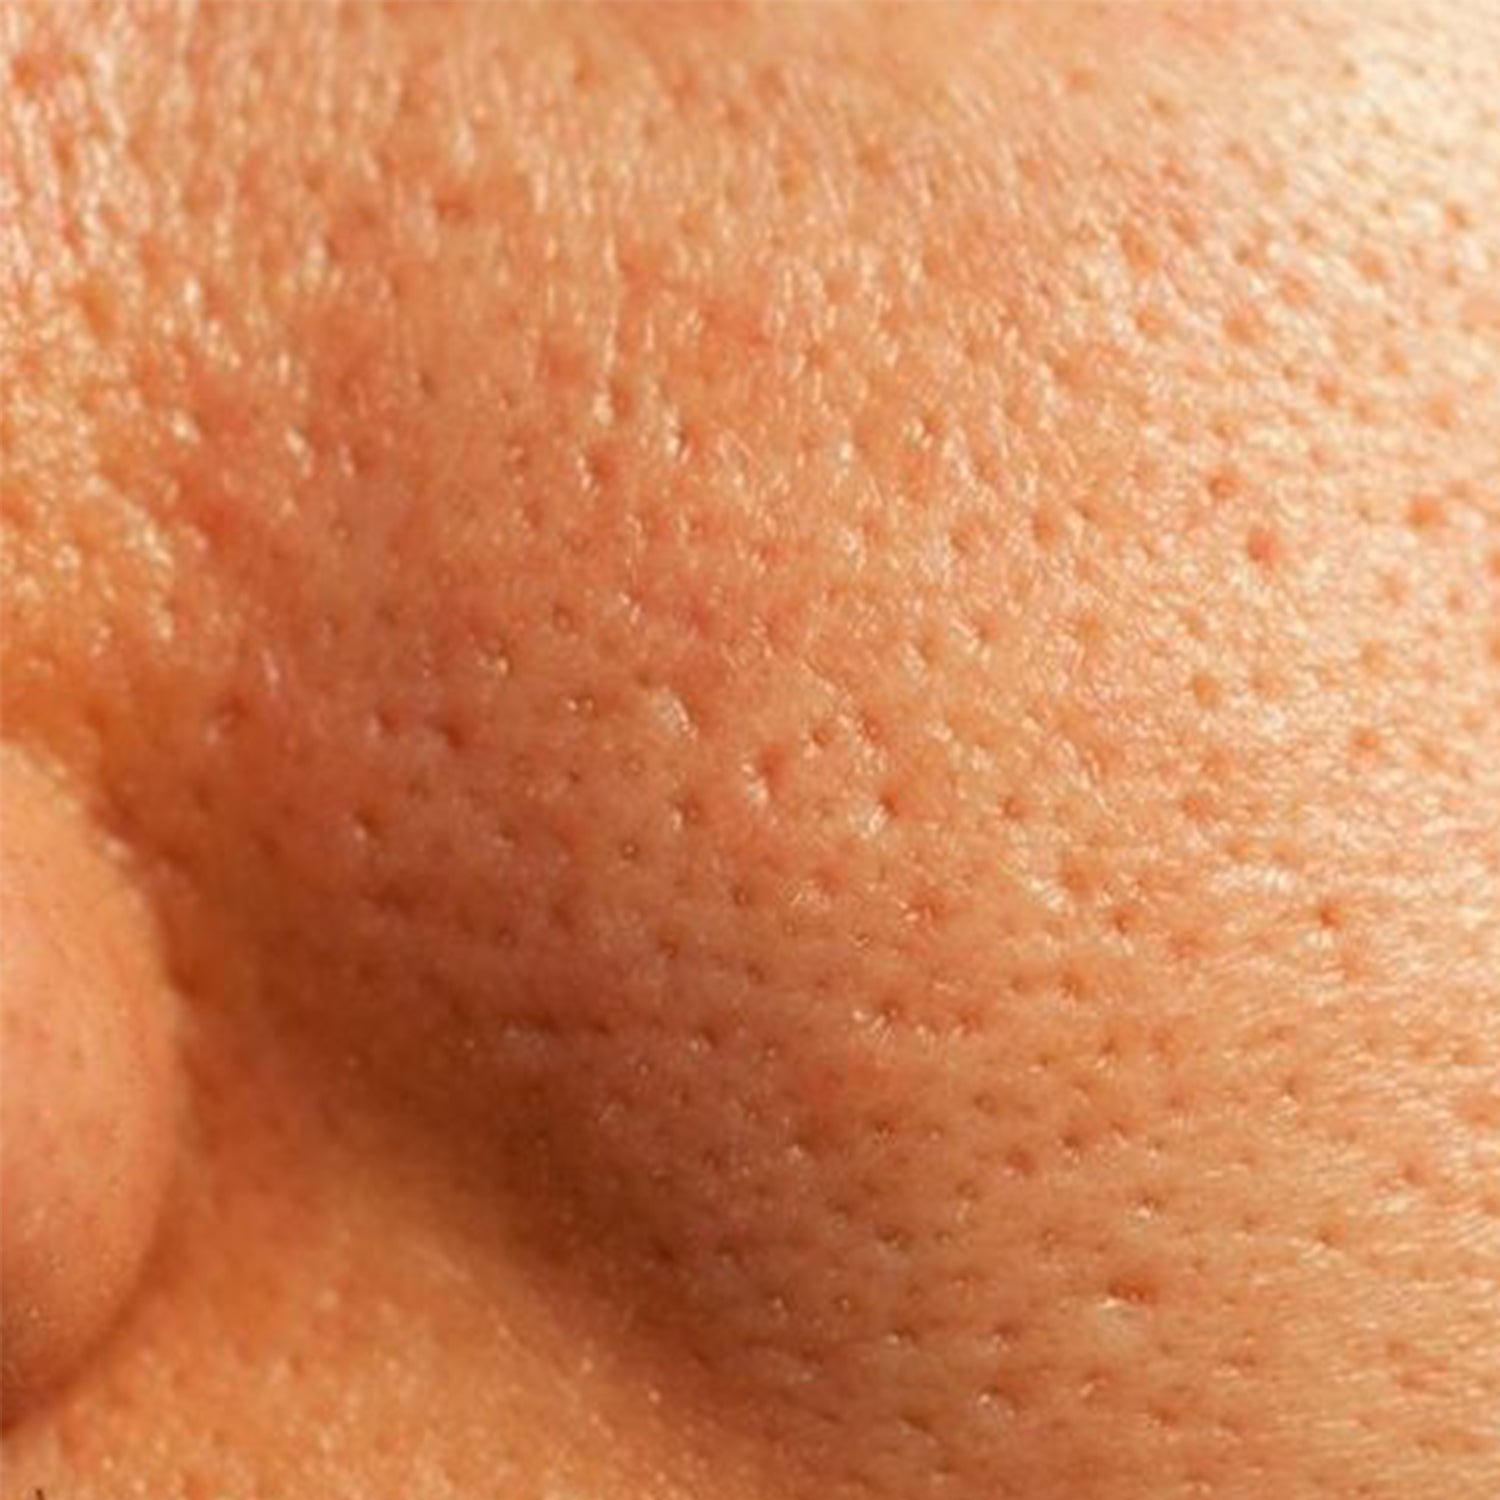 Enlarged or Open Pores